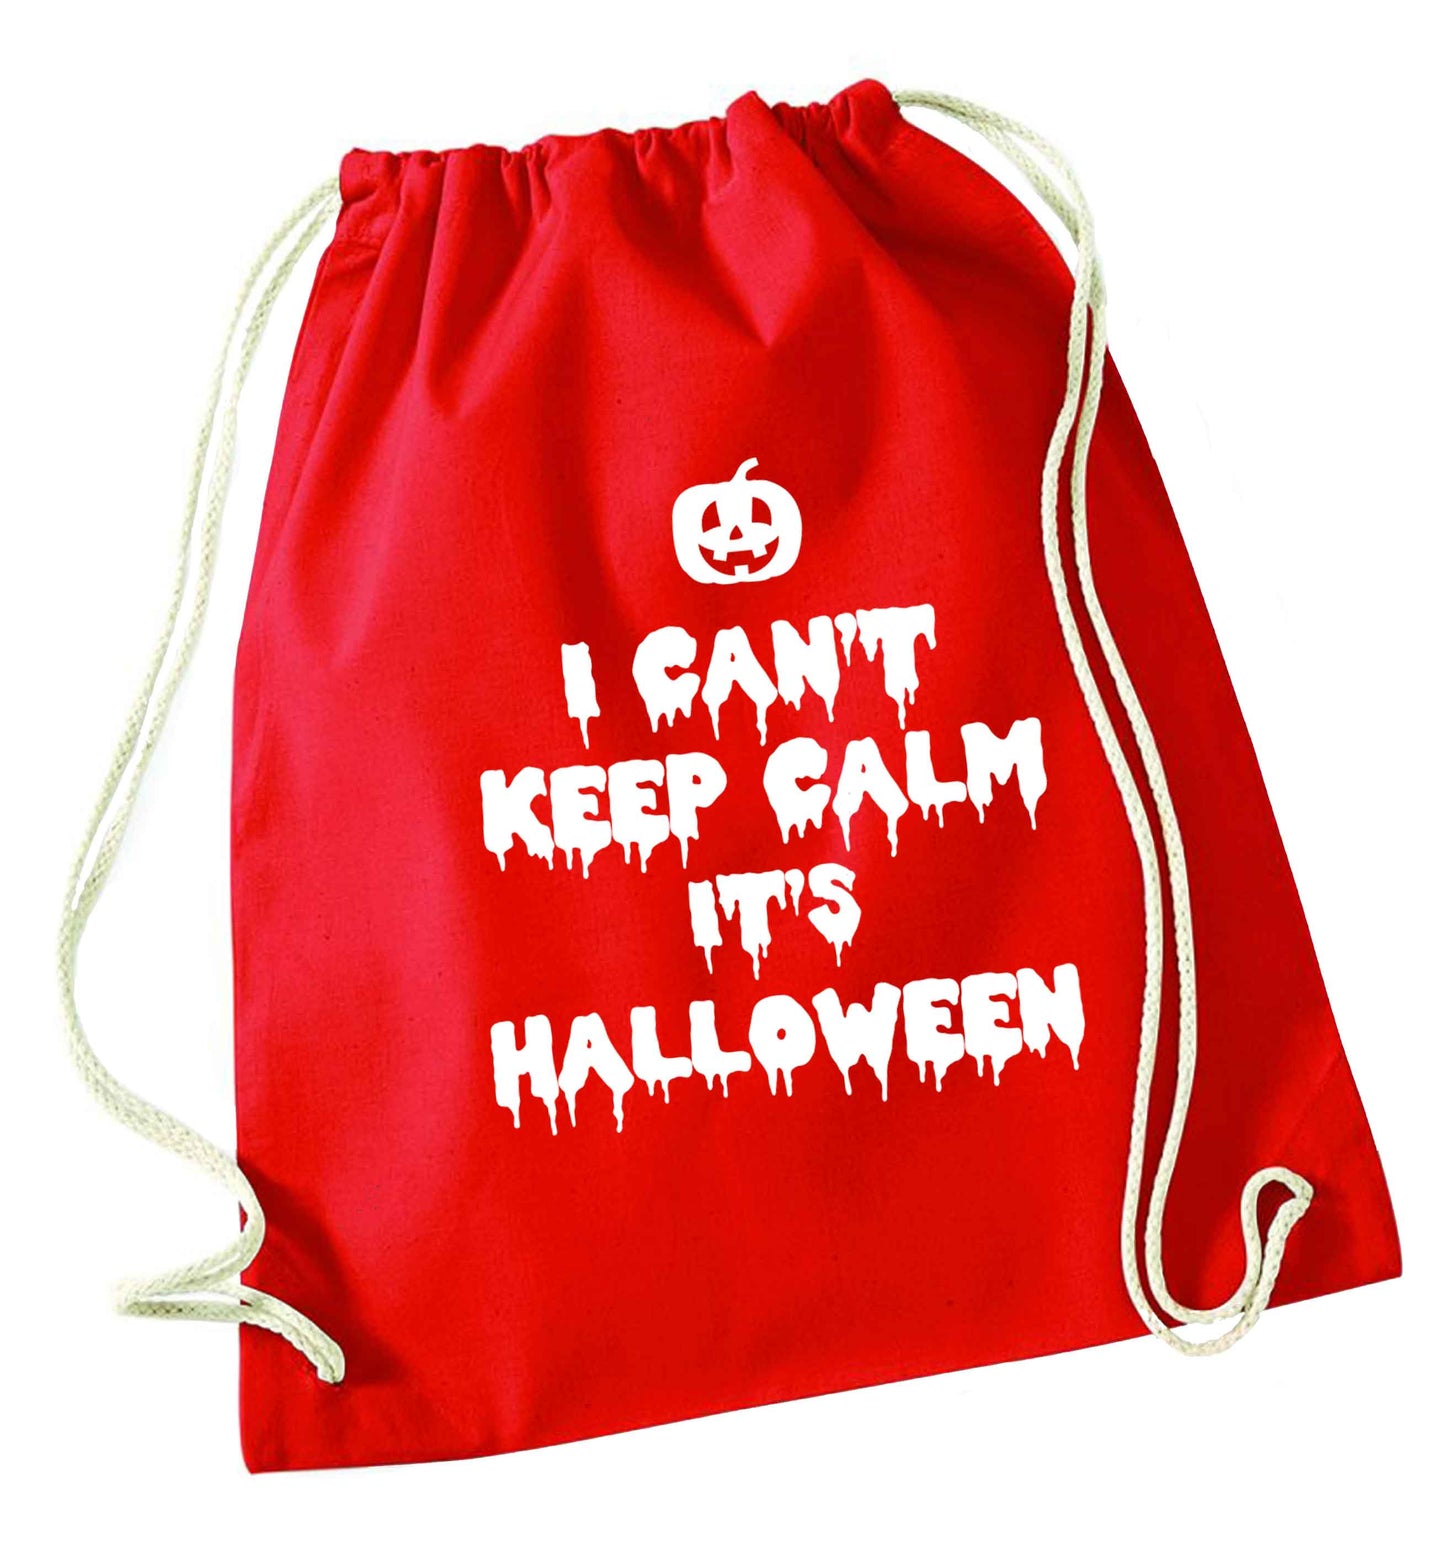 I can't keep calm it's halloween red drawstring bag 